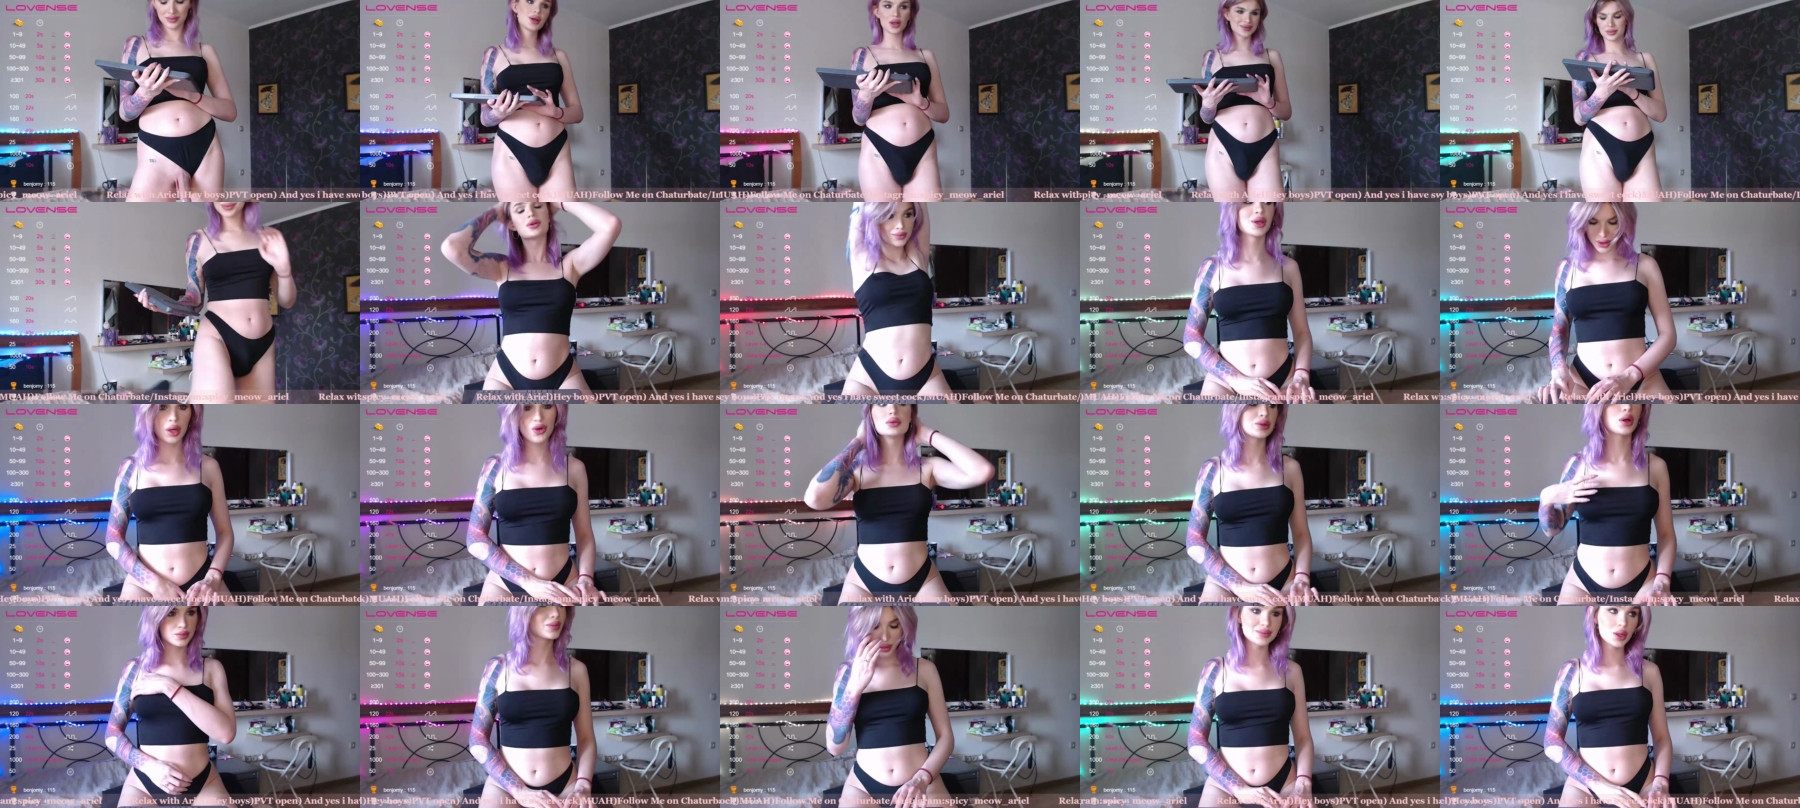 Spicy_Meow  26-04-2021 Trans Porn